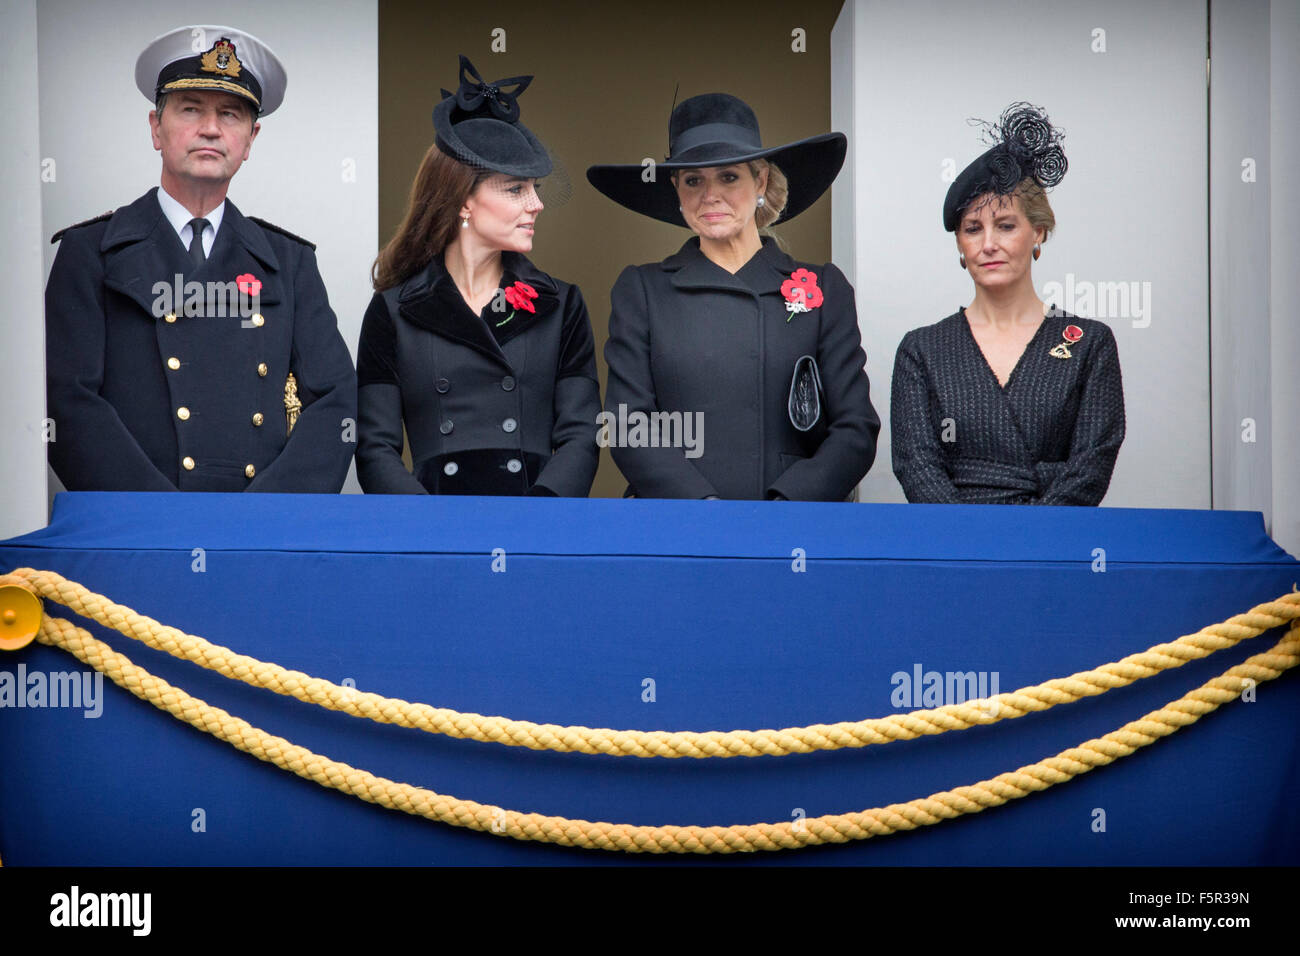 Britain's Catherine the Duchess of Cambridge (2nd L) stands alongside Queen Maxima of the Netherlands (2nd R), Sophie, Duchess of Wessex, and Vice Admiral Sir Timothy Laurence at the Remembrance Sunday ceremony at the Cenotaph in London, Britain, 08 November2015. Britain observed the annual Remembrance Day on 08 November, in memory of the war dead. Photo: Patrick van Katwijk/ POINT DE VUE OUT - NO WIRE SERVICE - Stock Photo